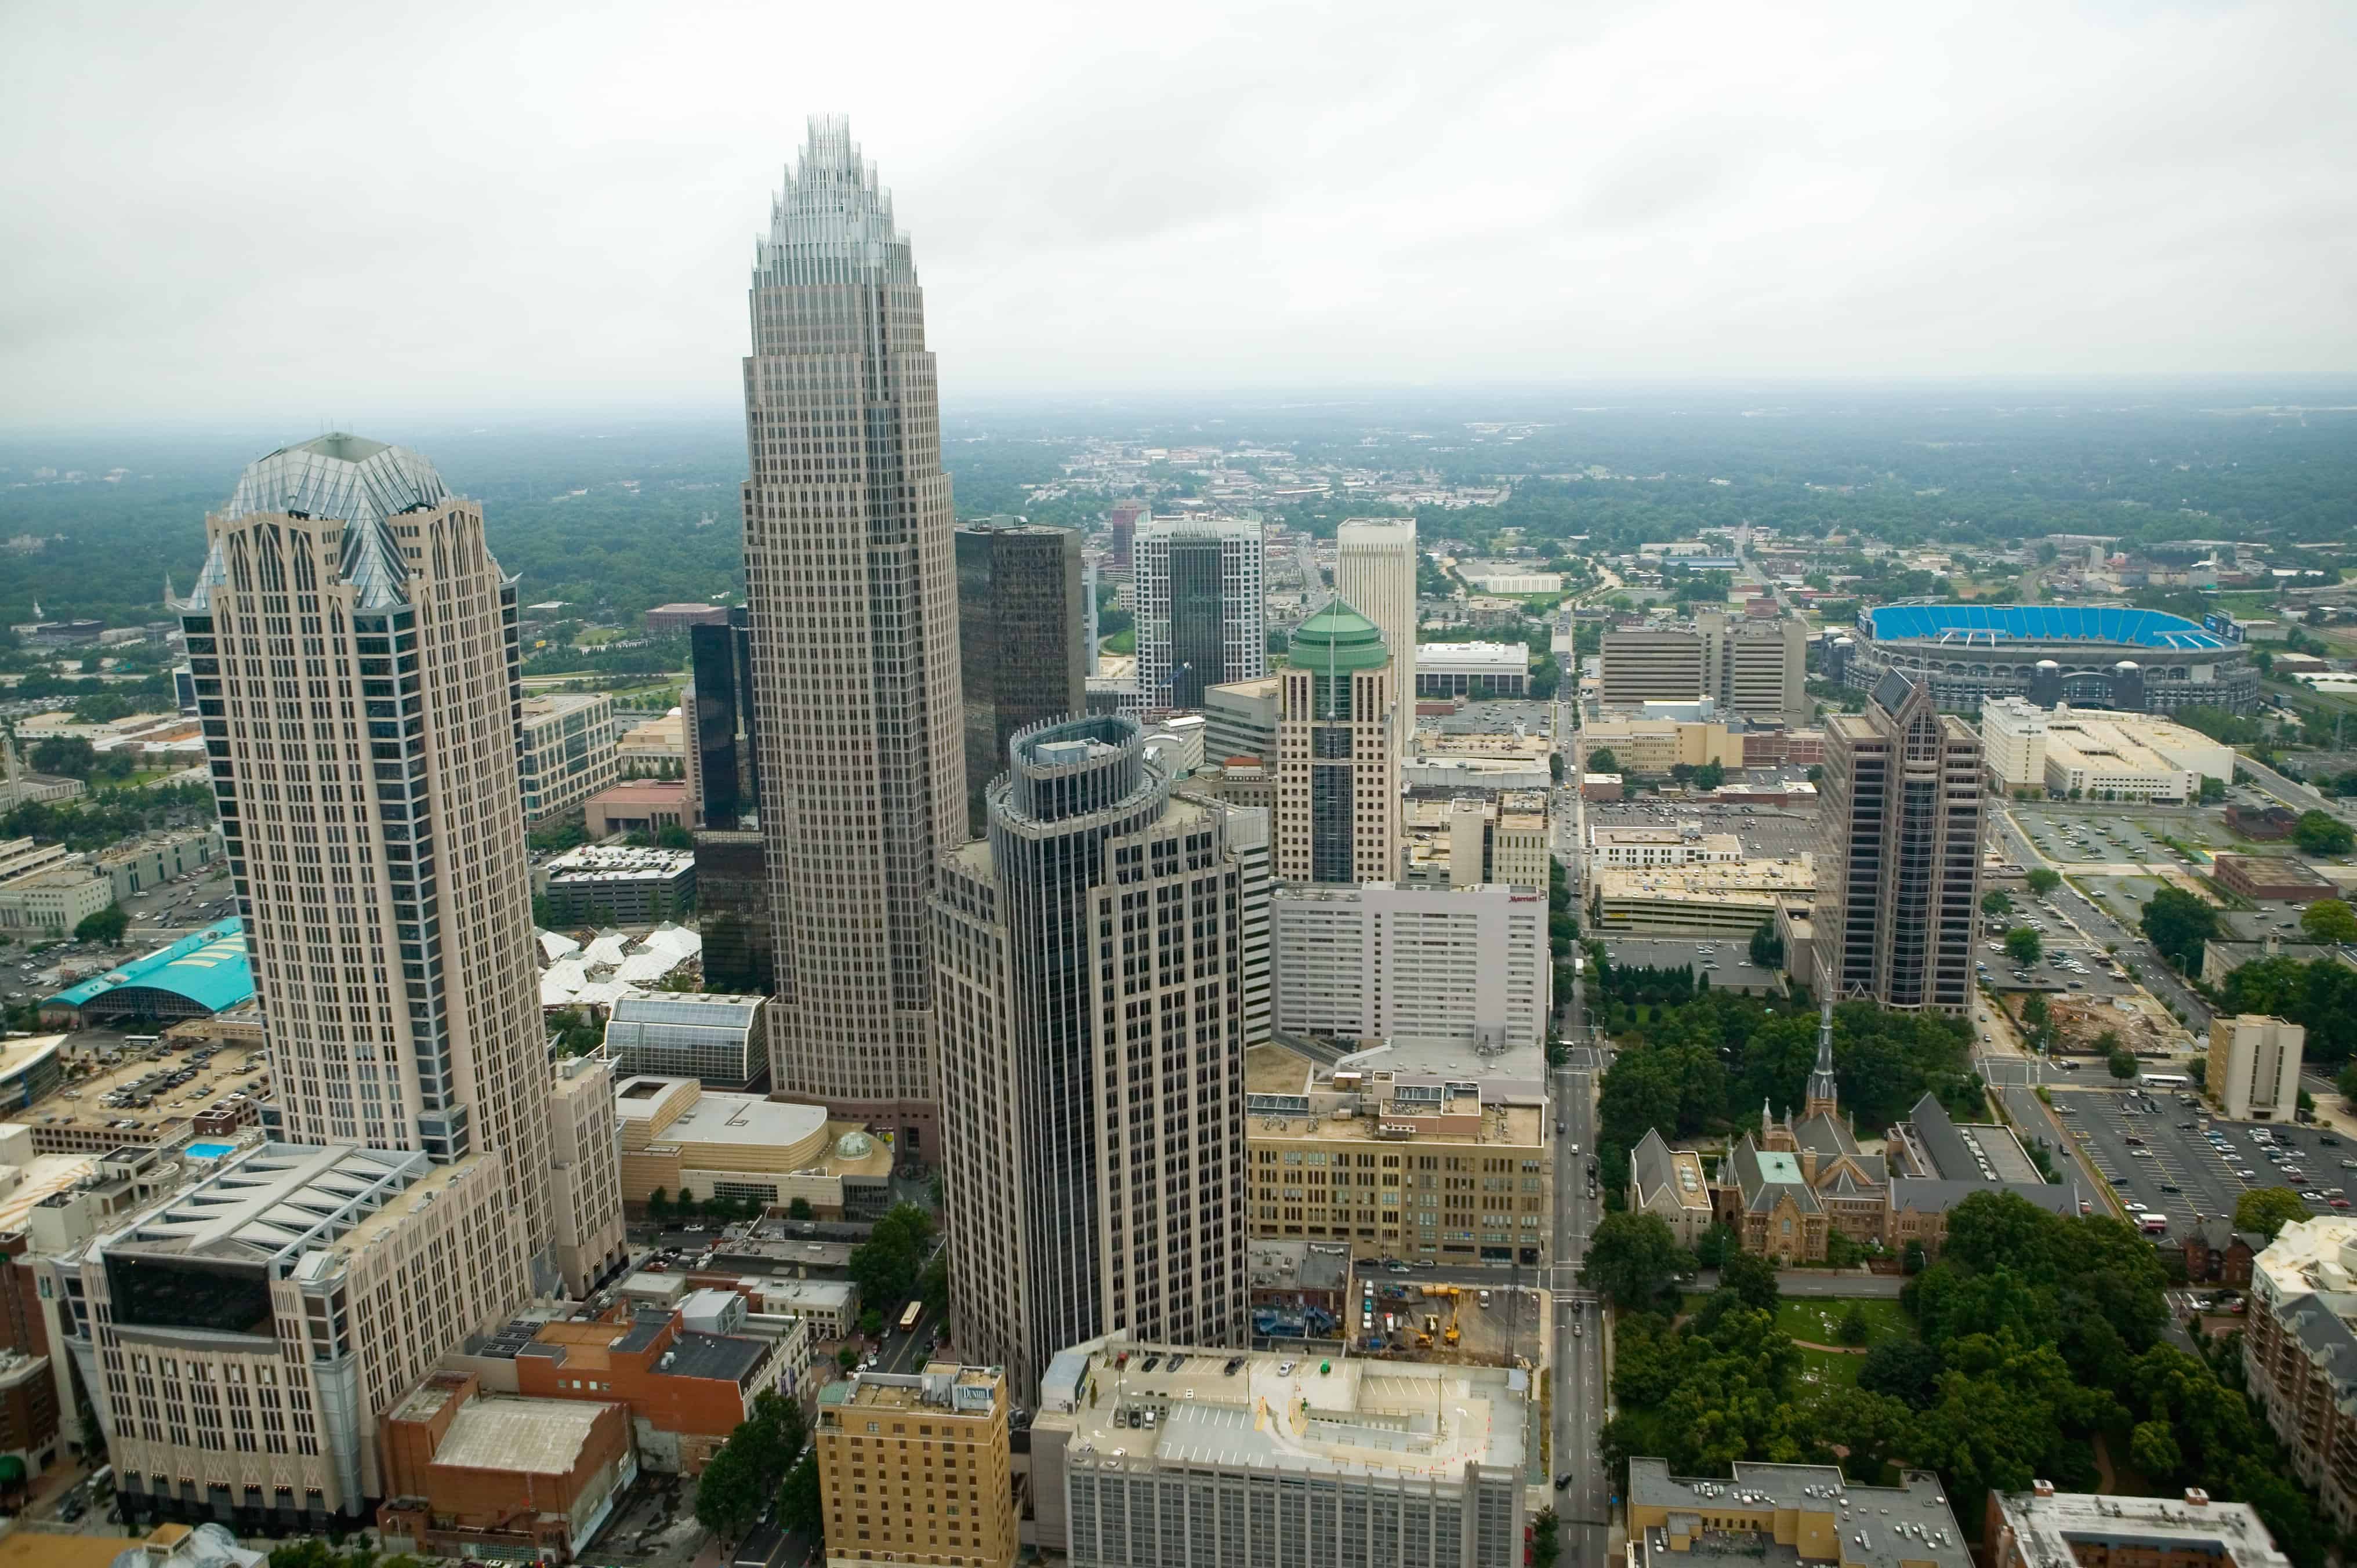 Aerial view of Charlotte, NC